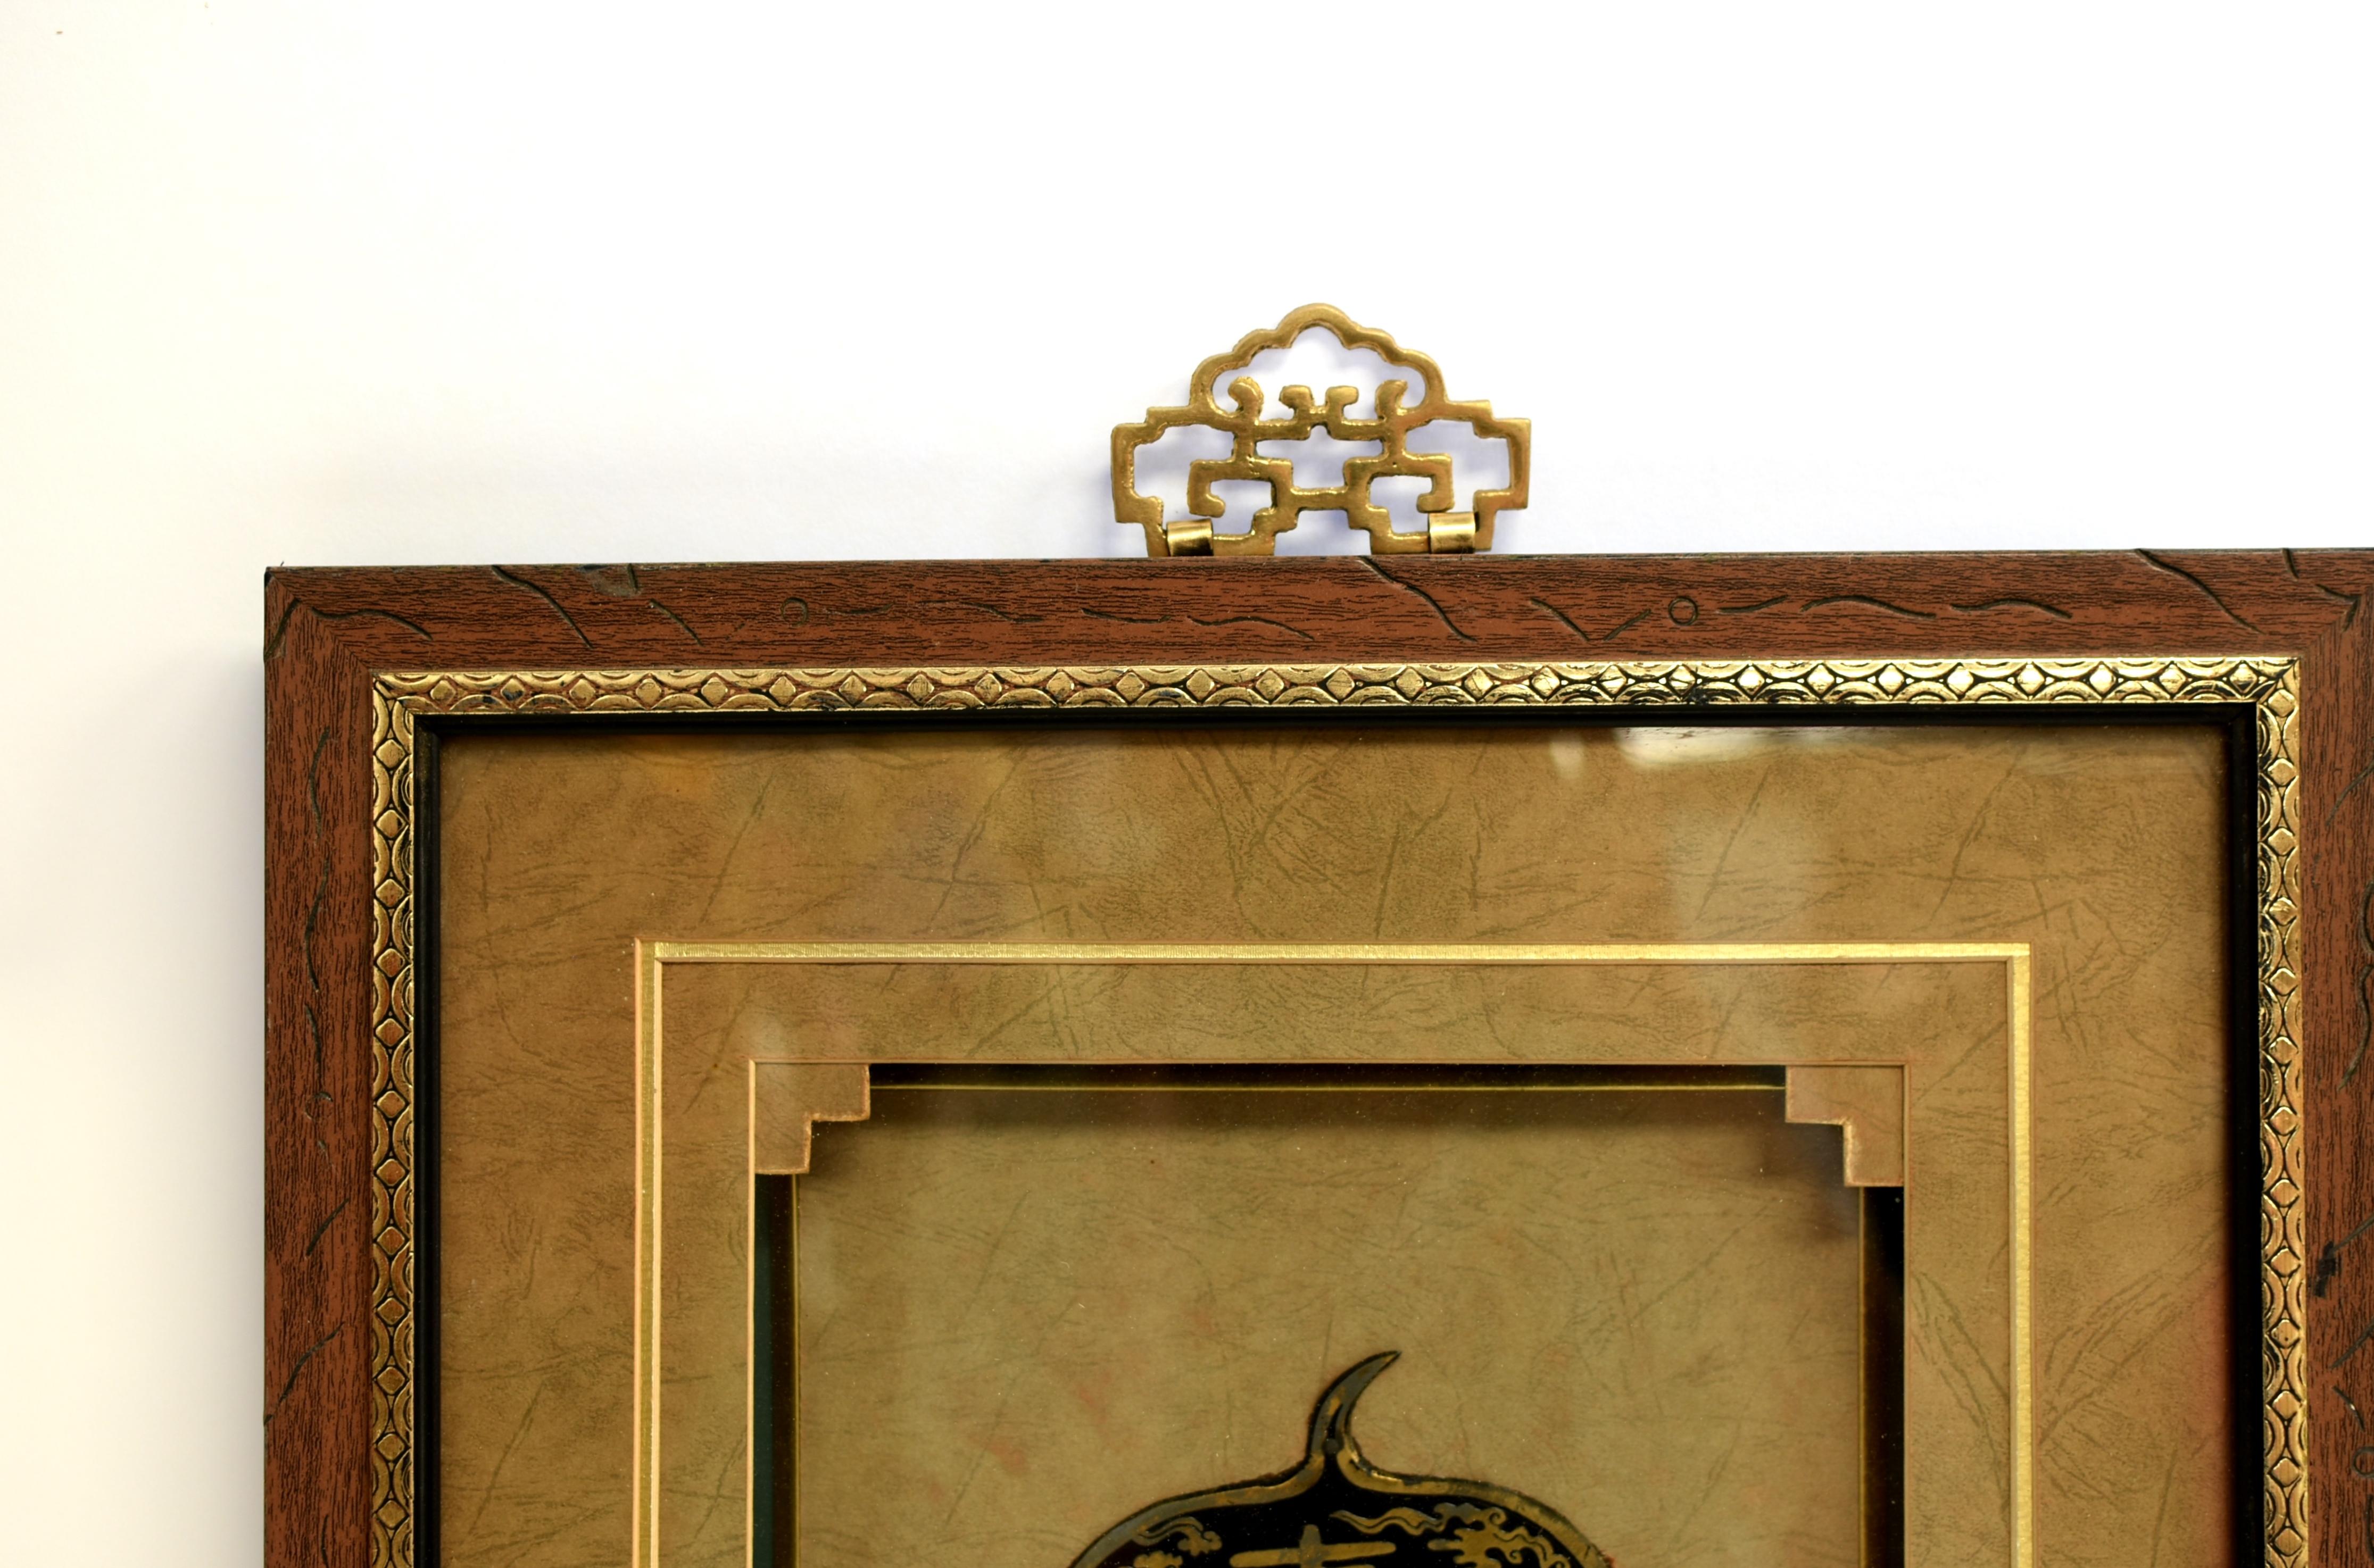 A beautiful vintage shadowbox of solid brass hardware. The exceptionally large gourd-shaped door plate is prominently featured, displaying great details of a finely engraved longevity theme. Anchoring the art is the God of Longevity holding a gourd